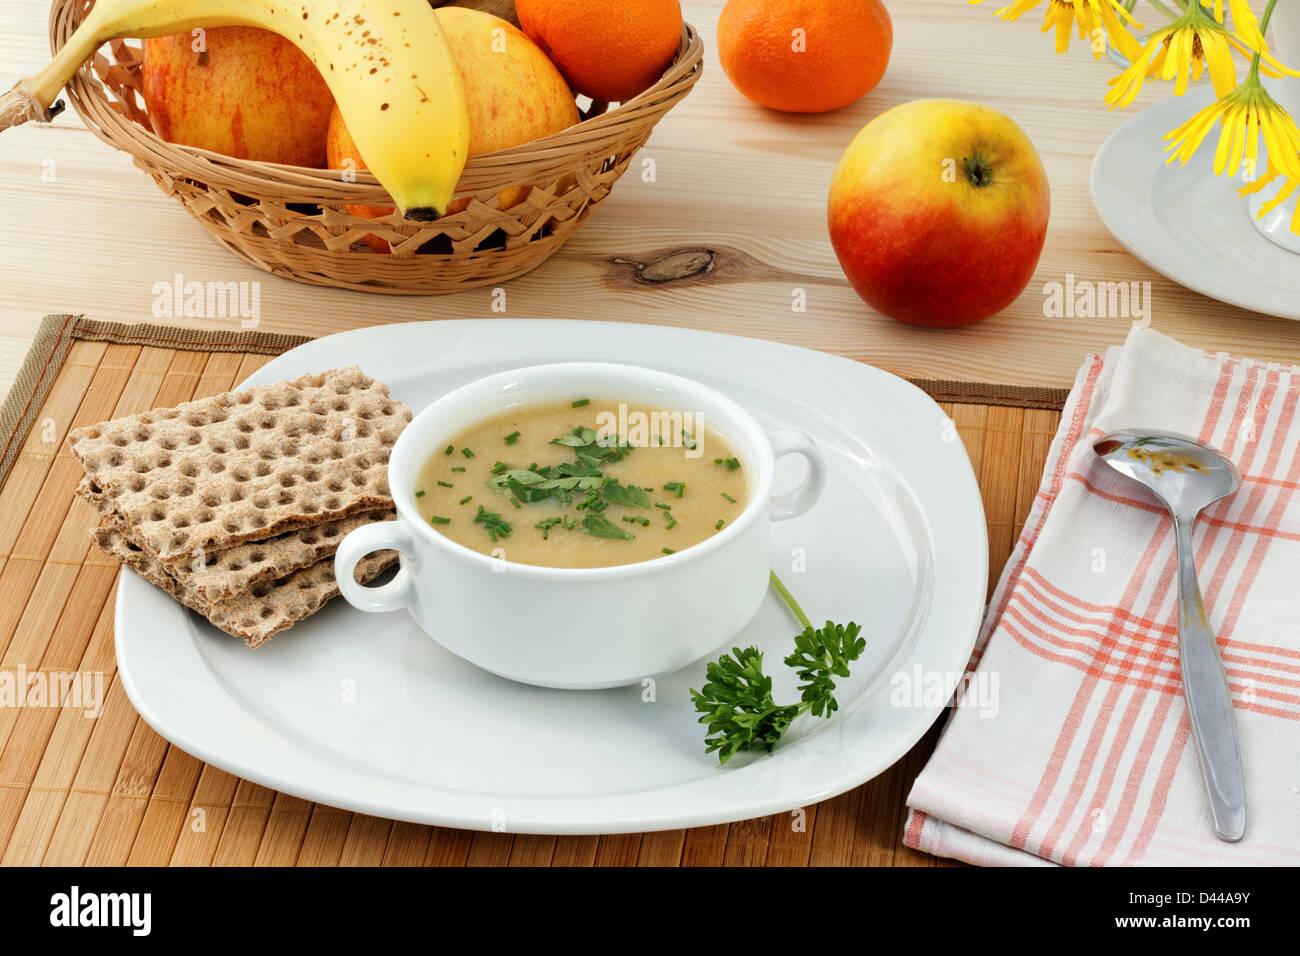 Healthy dinner with vegetable mashed soup and fruits. Stock Photo